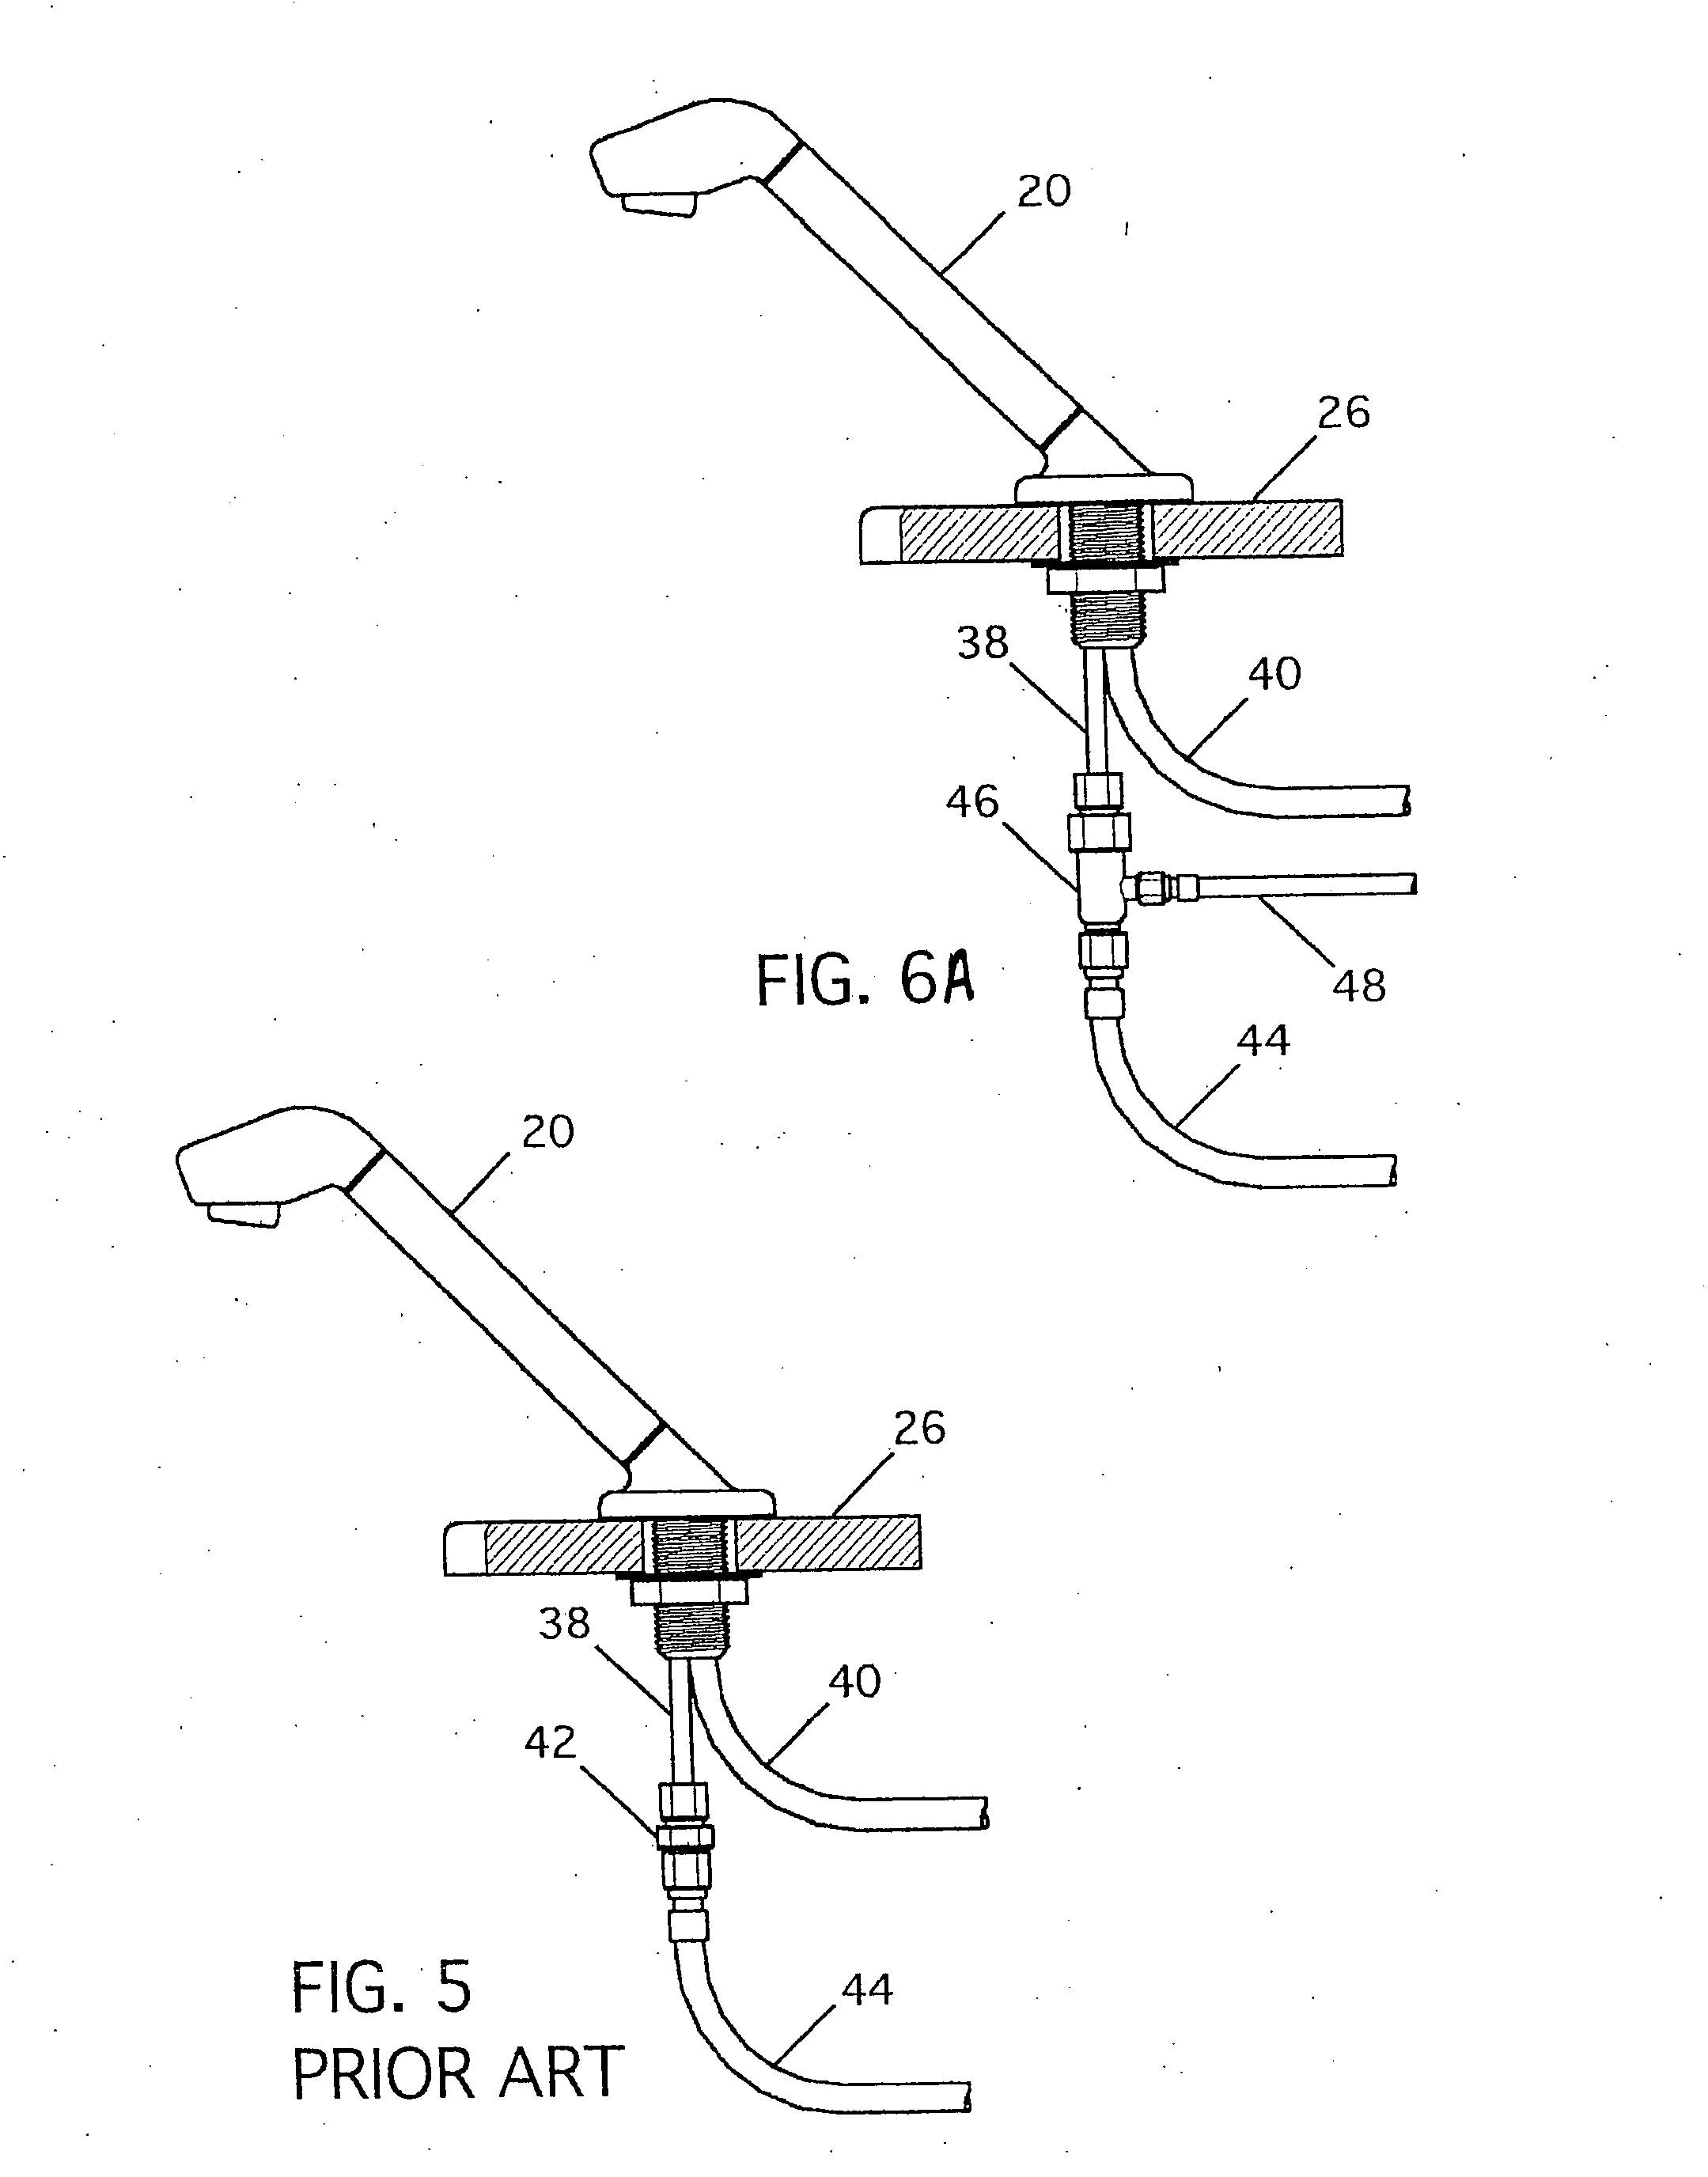 Dispensing system and method, and injector therefor